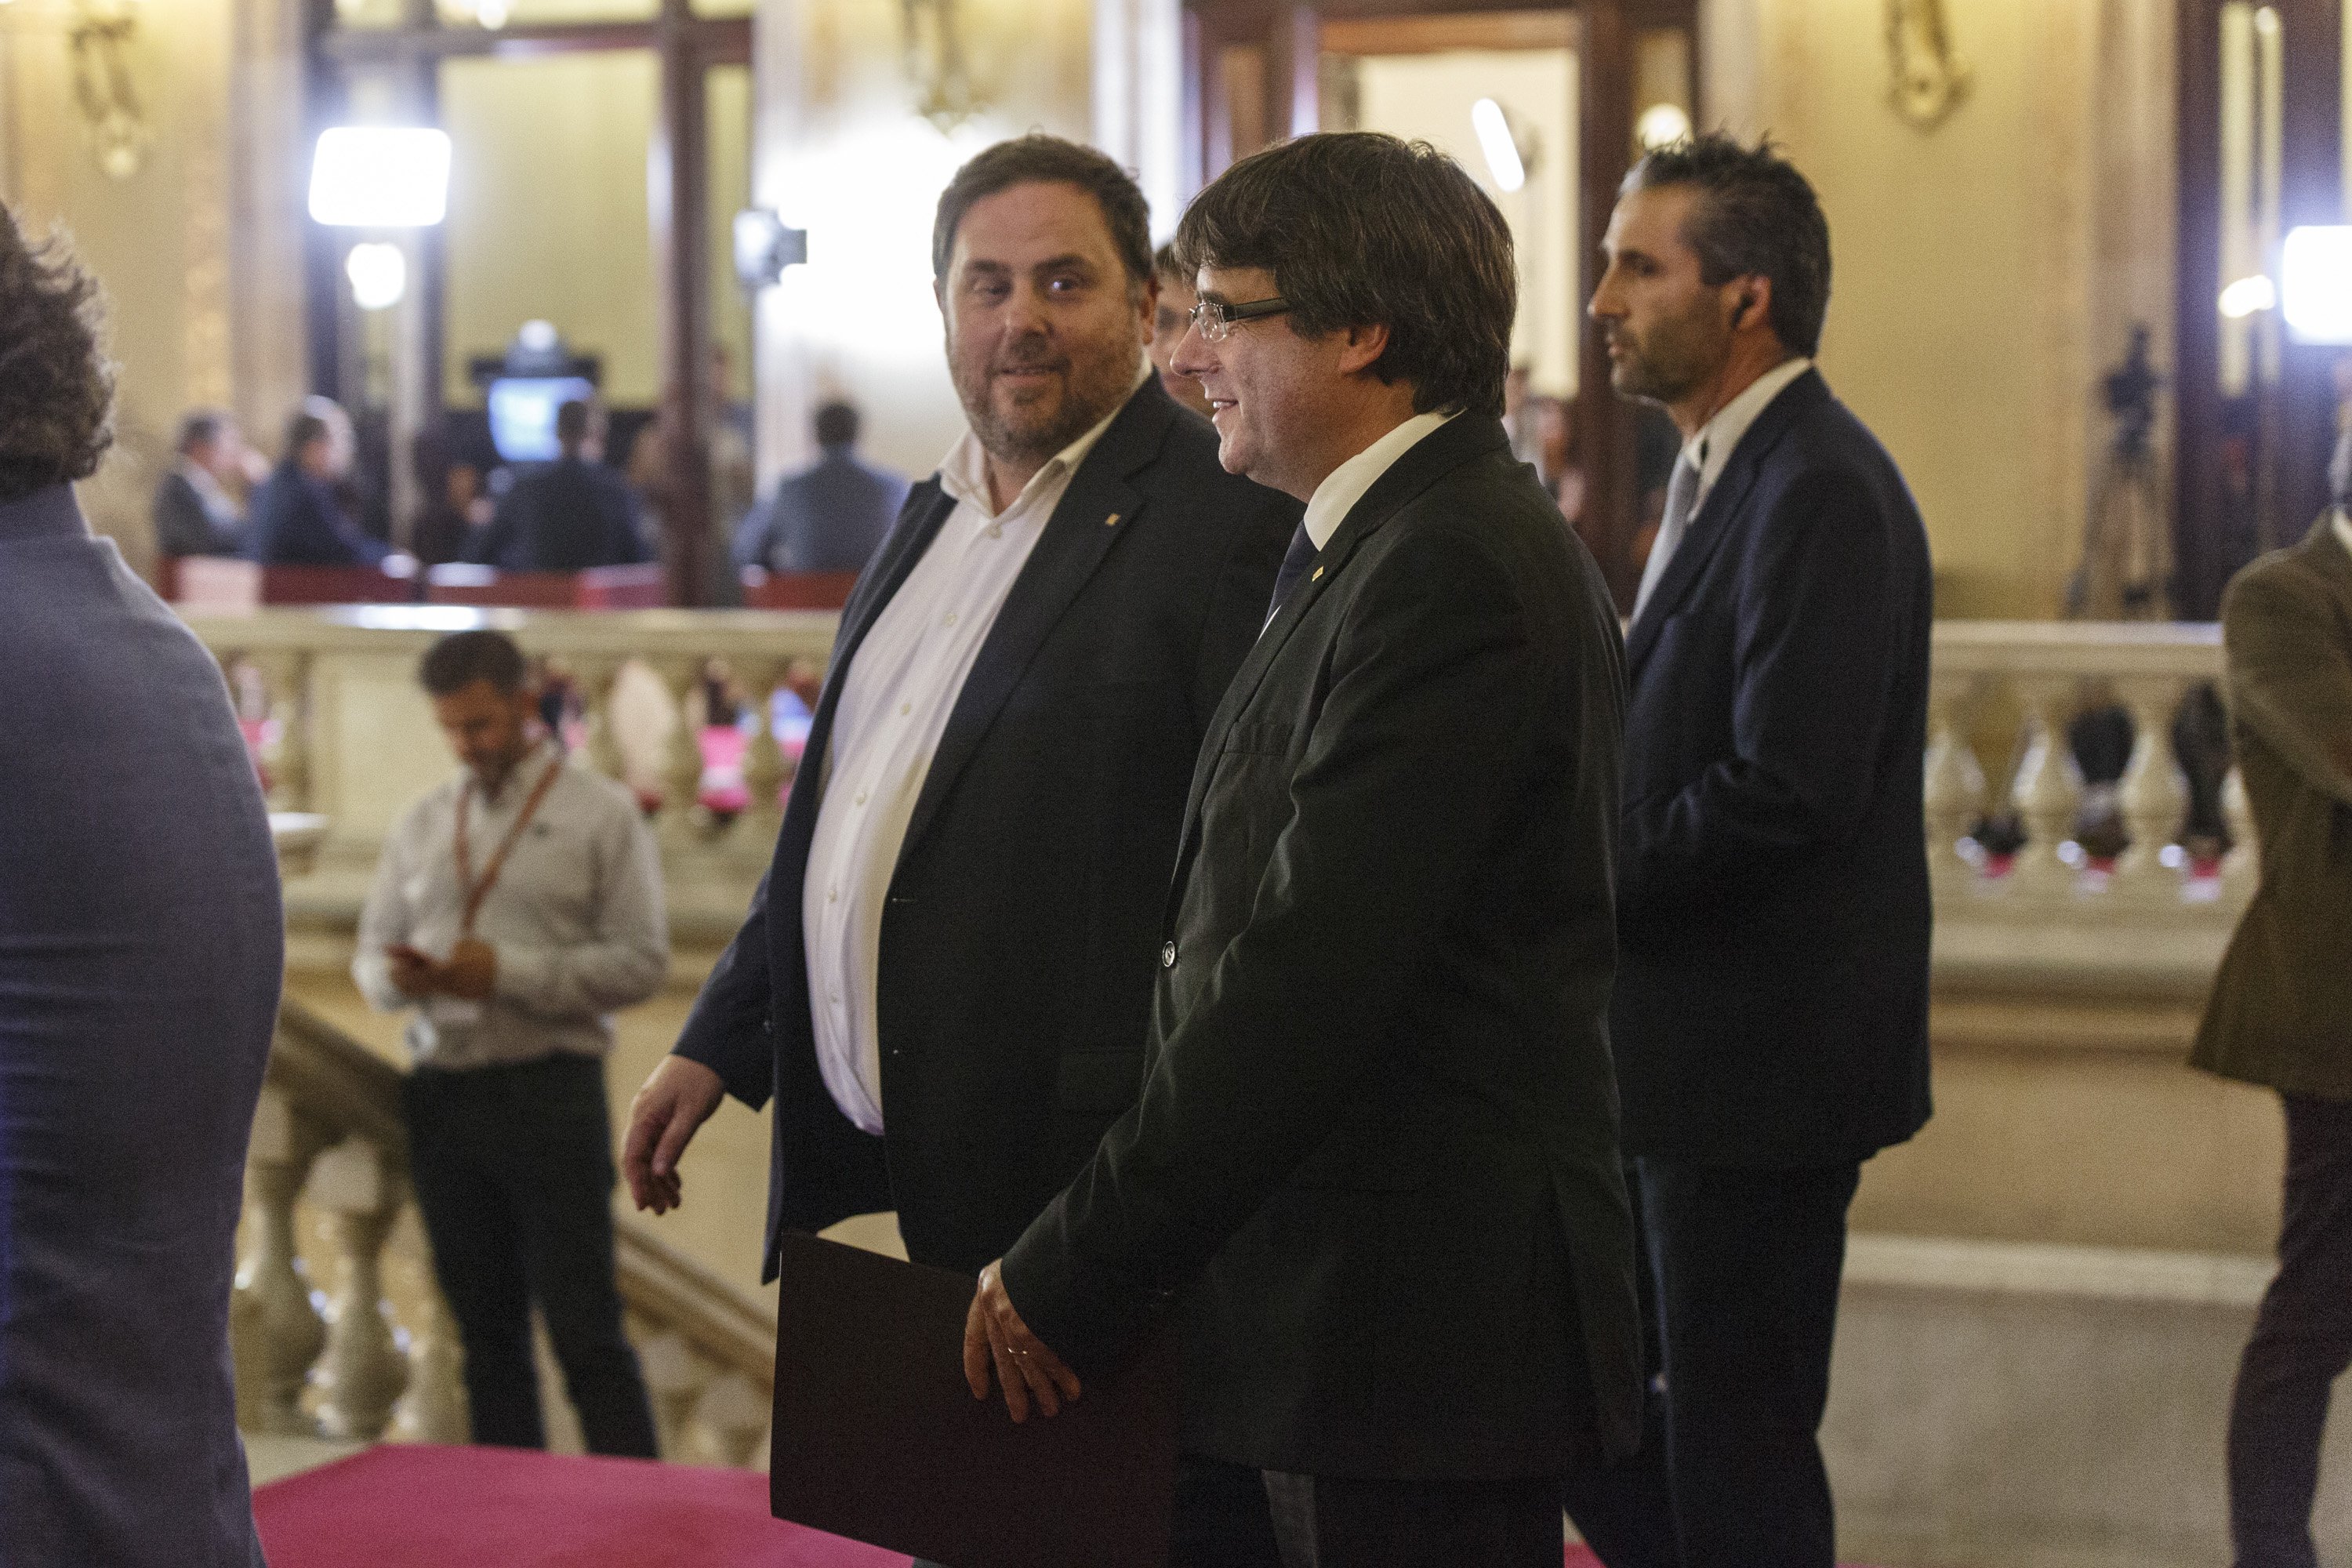 "Catalonia will not retreat" says Junqueras in New York Times